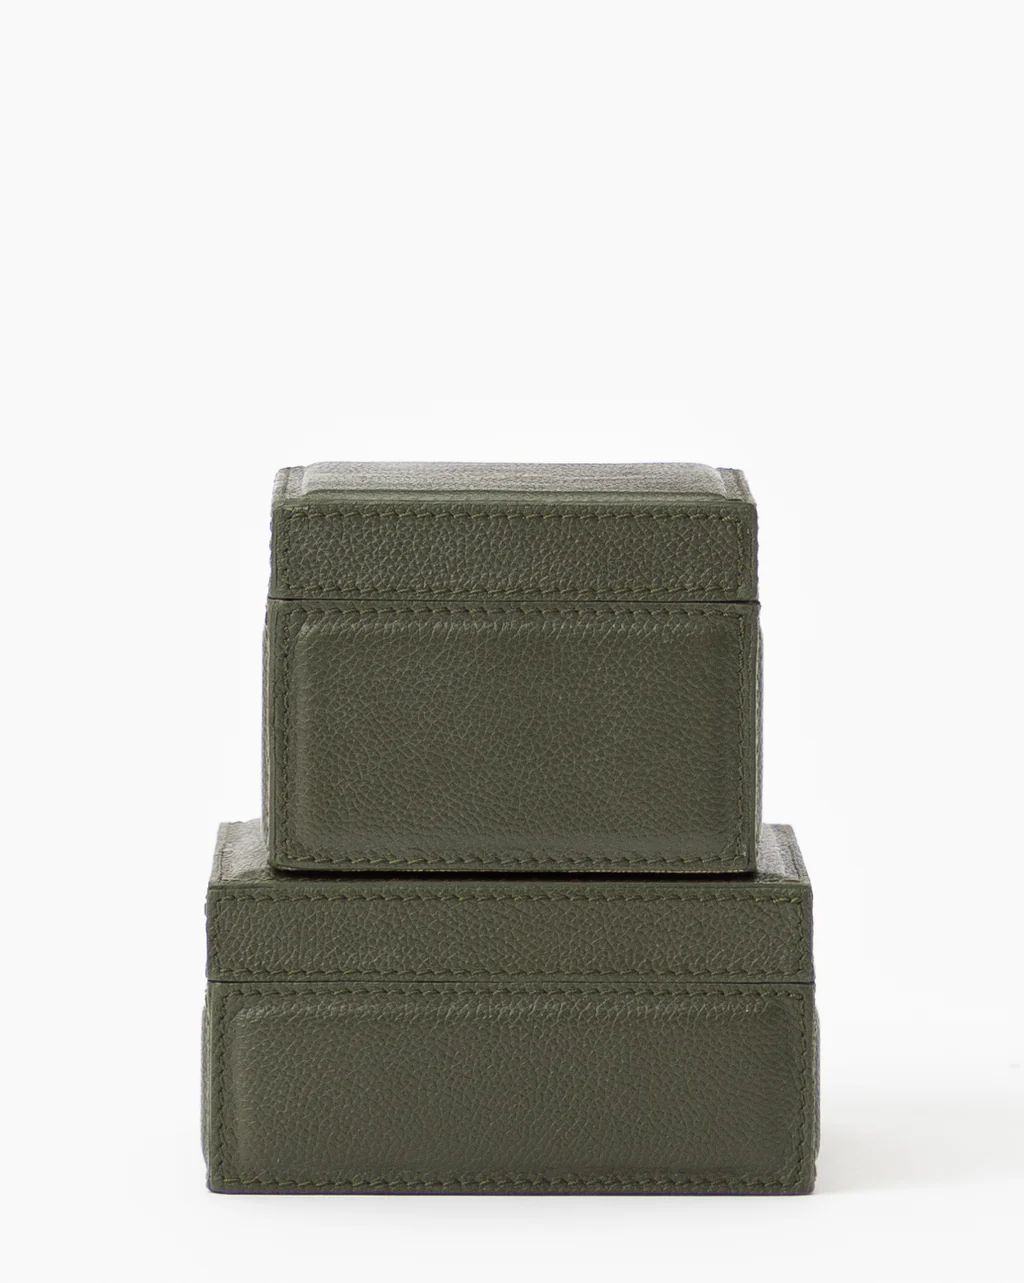 Green Leather Box | McGee & Co.